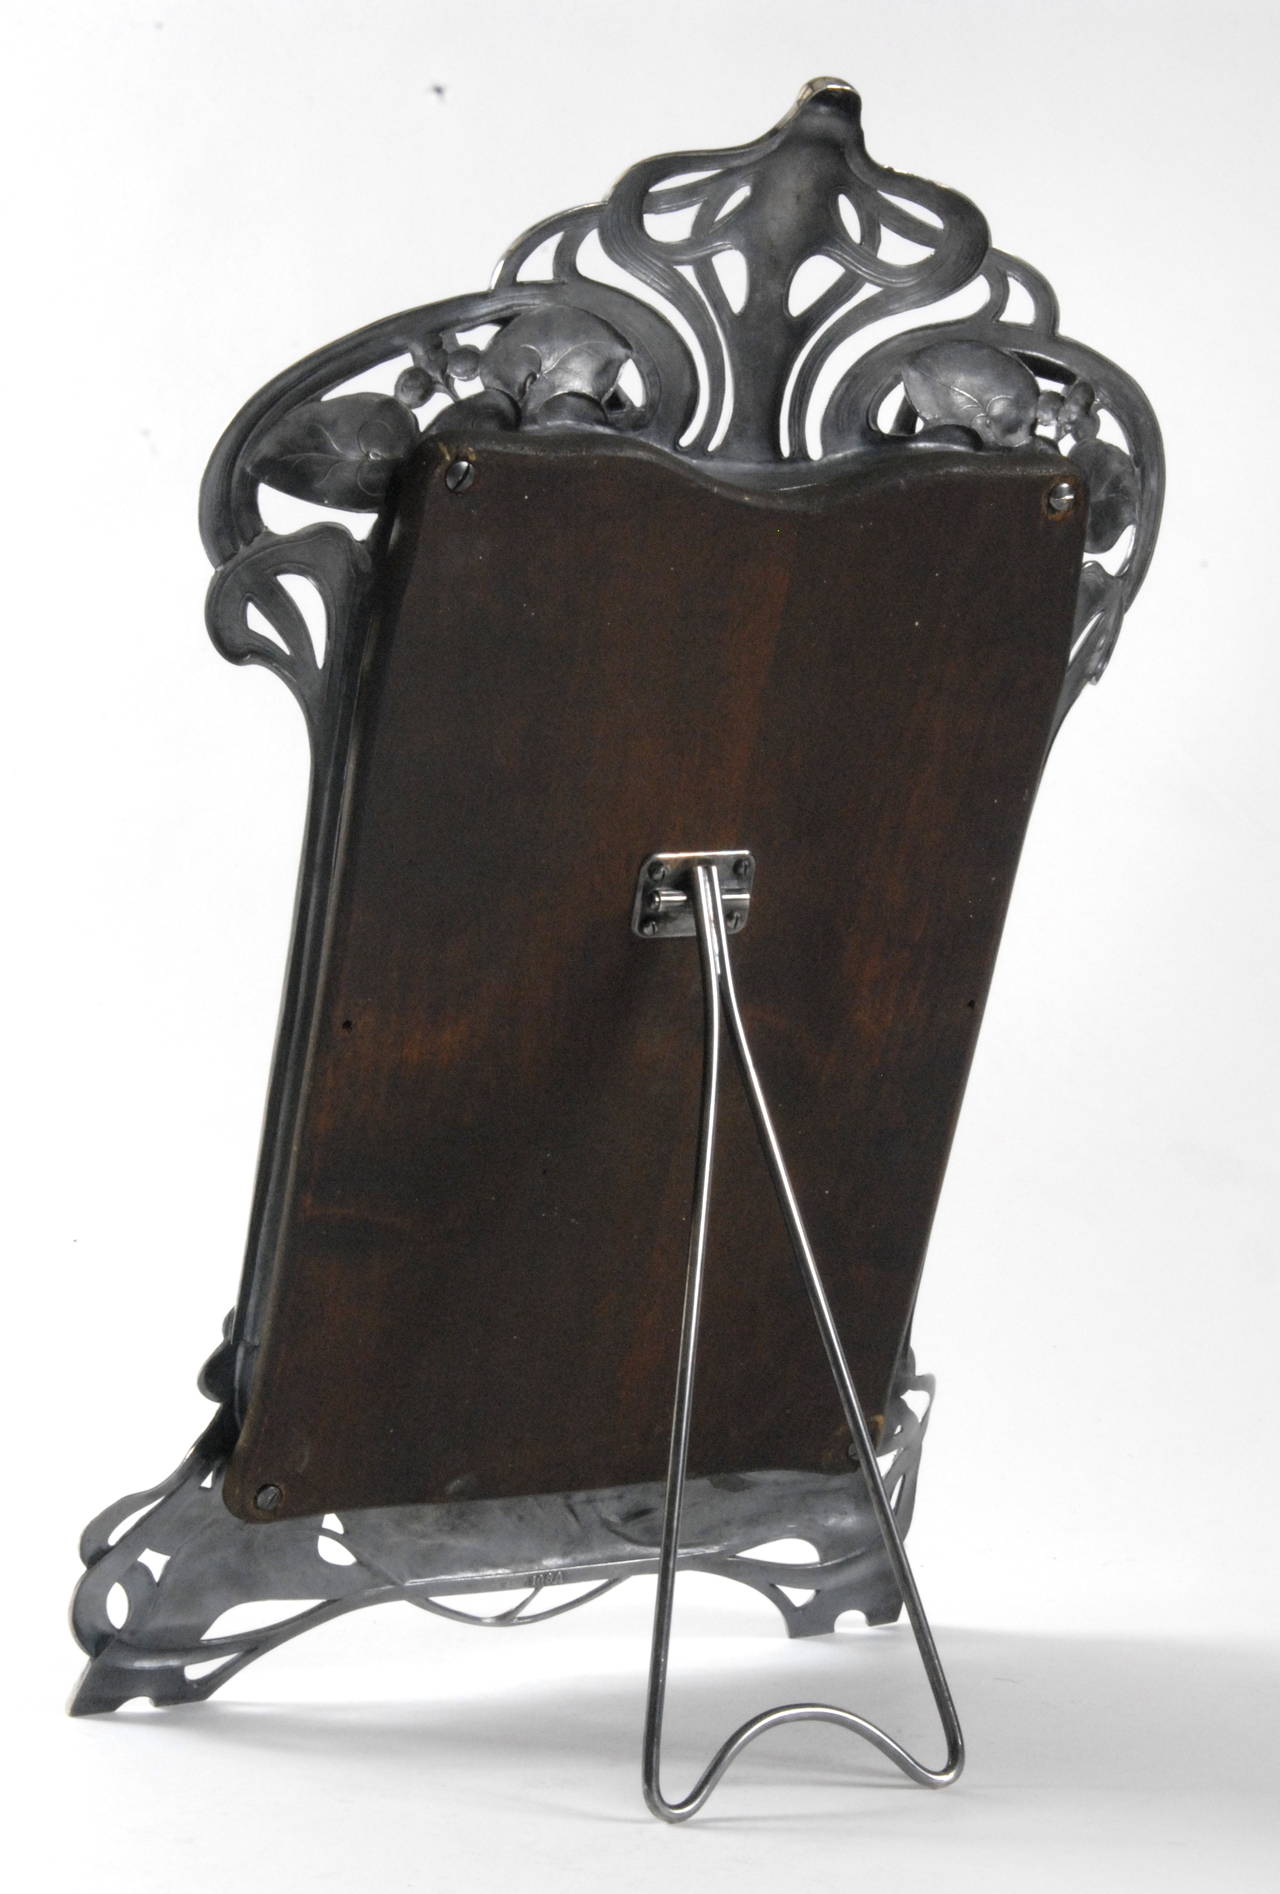 A WMF [Wurttembergische Metallwarenfabrik] toilet mirror, circa 1906, Germany, silver plated, pattern number 108a, as shown in photo. Original bevelled glass mirror and timber back, in near mint condition.